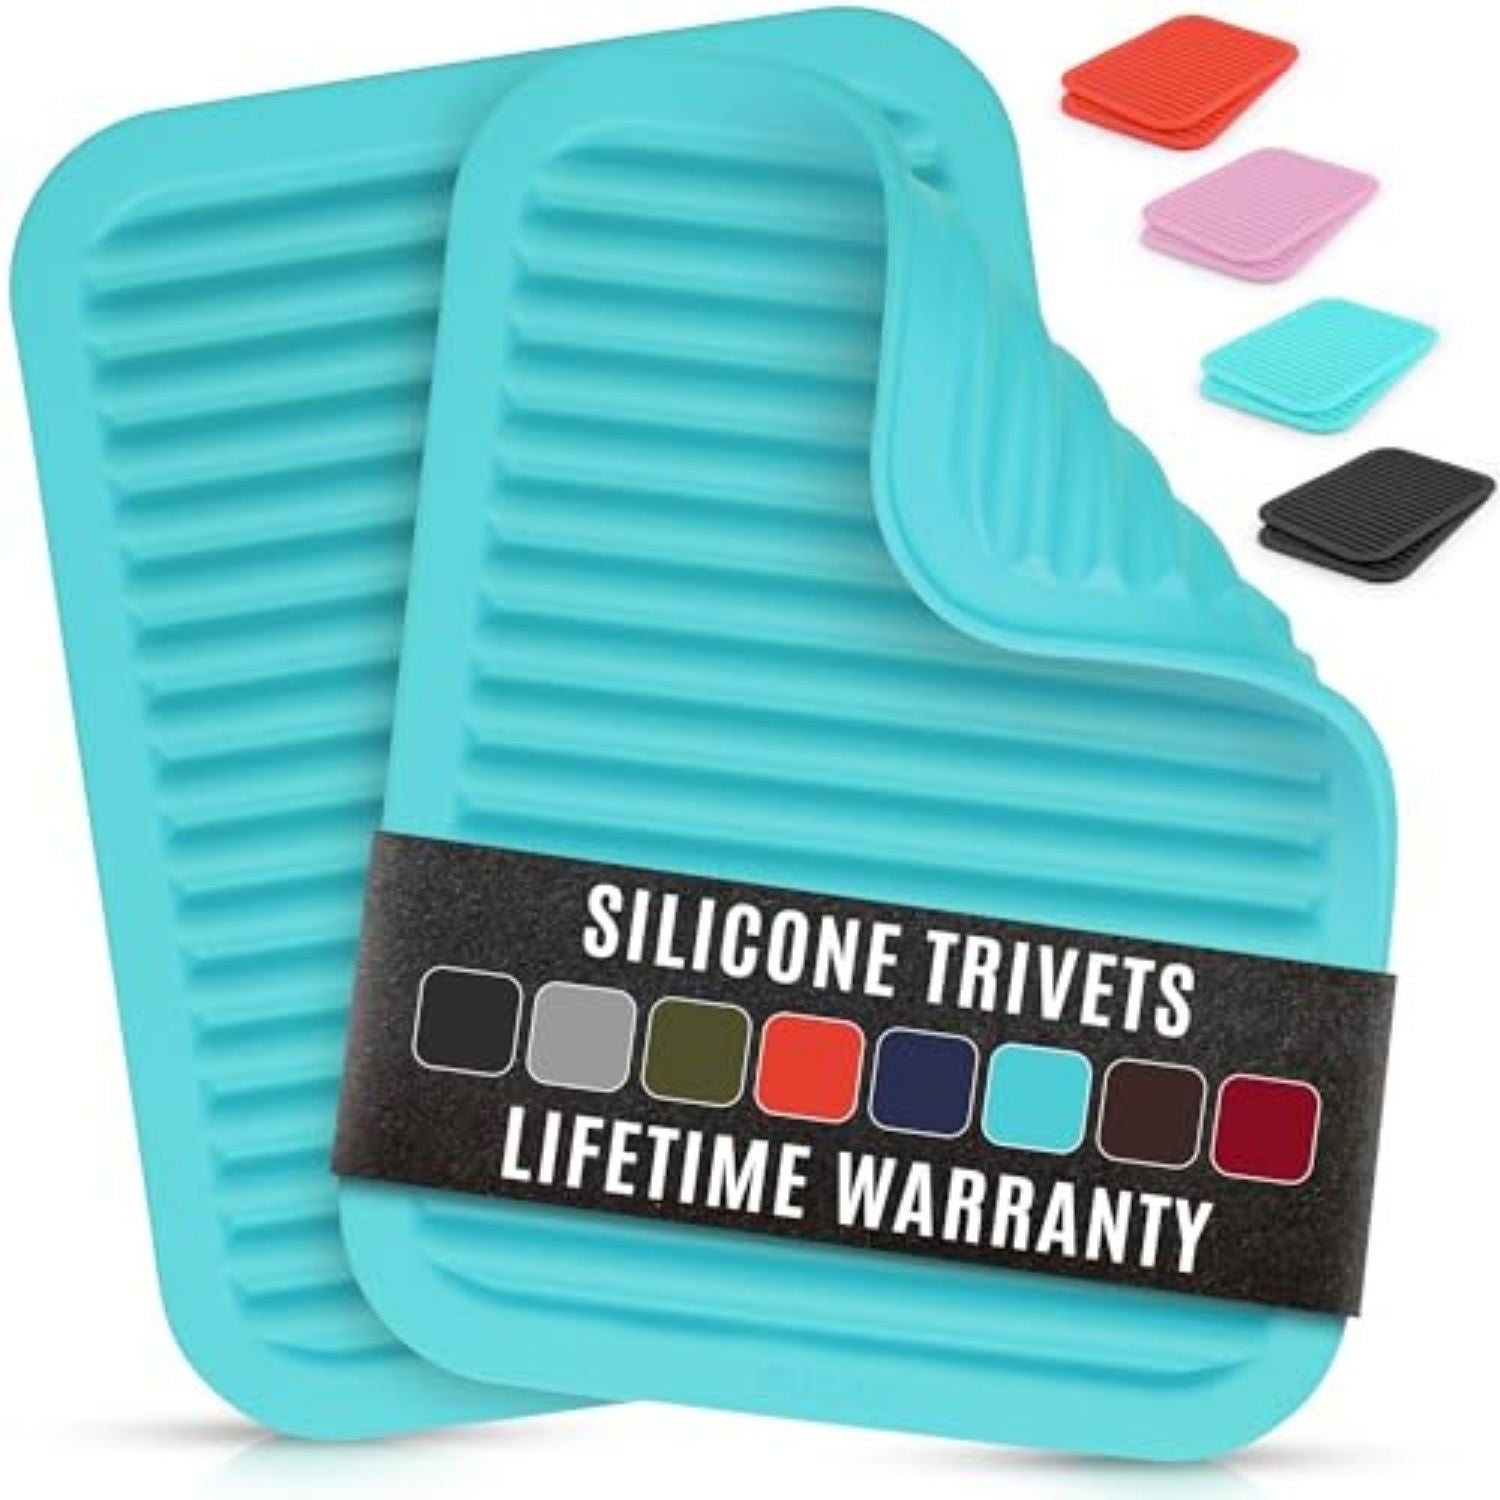 Silicone Trivets For Hot Pots and Pans (2 pack)